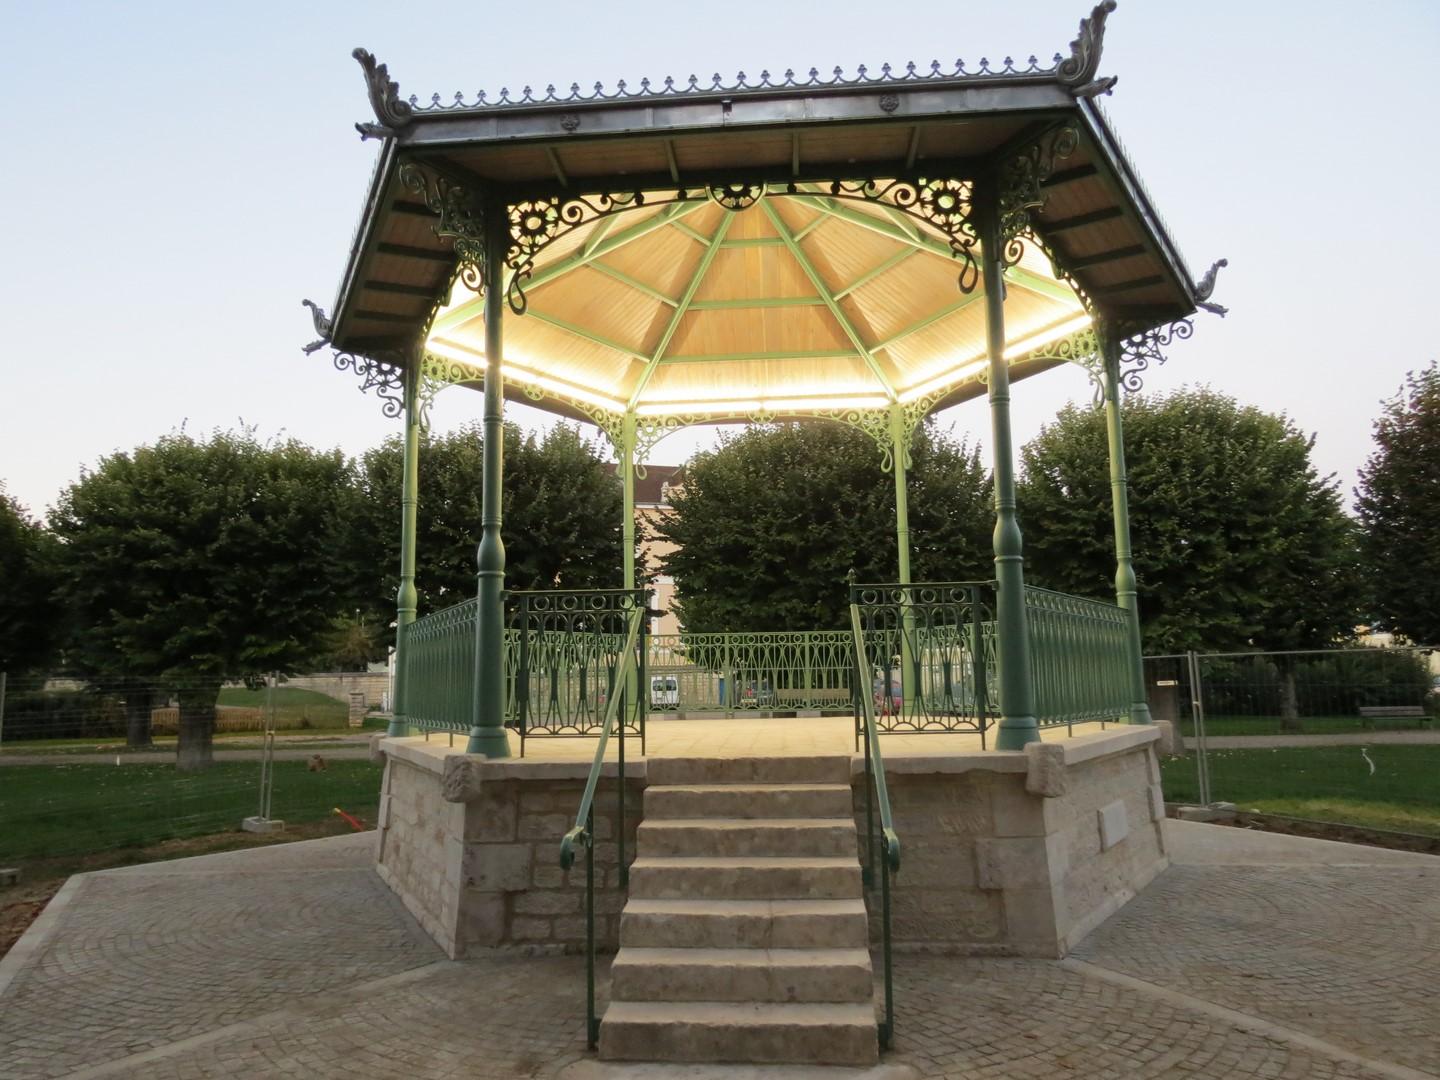 The restored bandstand in Tonnerre, France